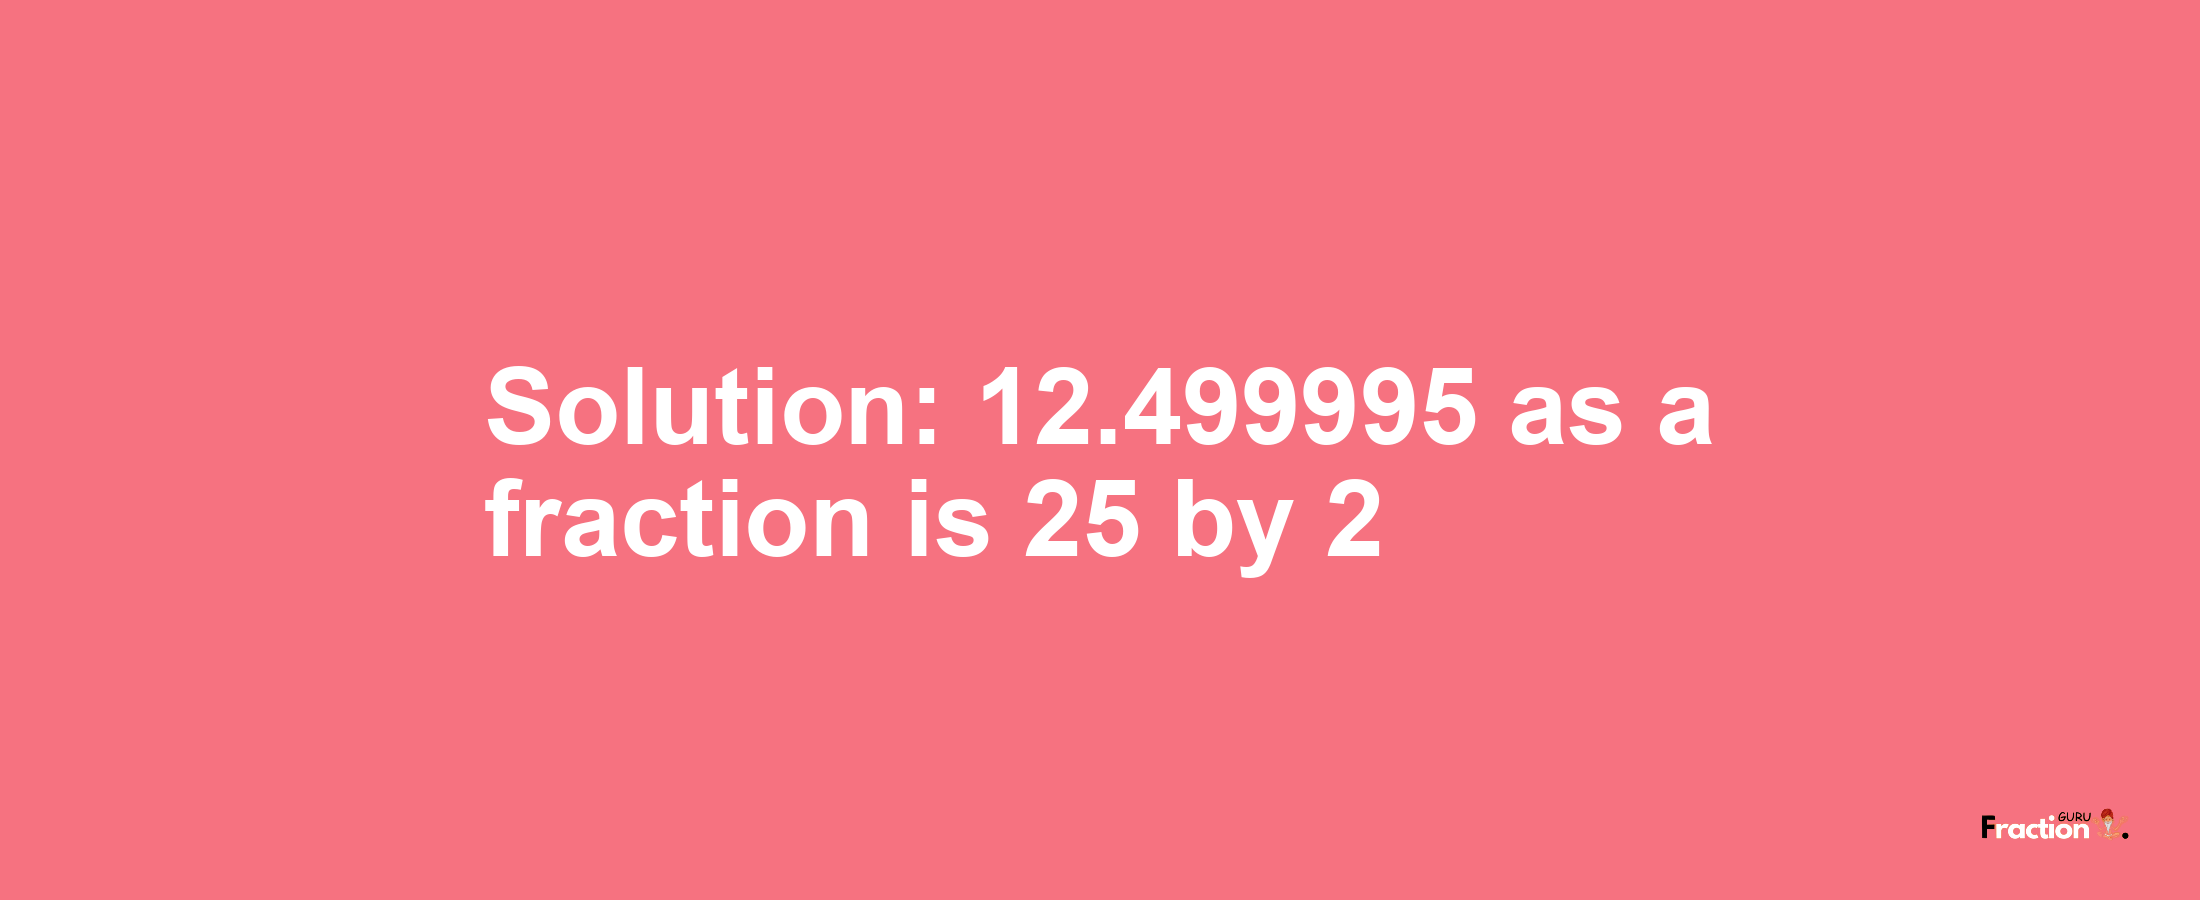 Solution:12.499995 as a fraction is 25/2